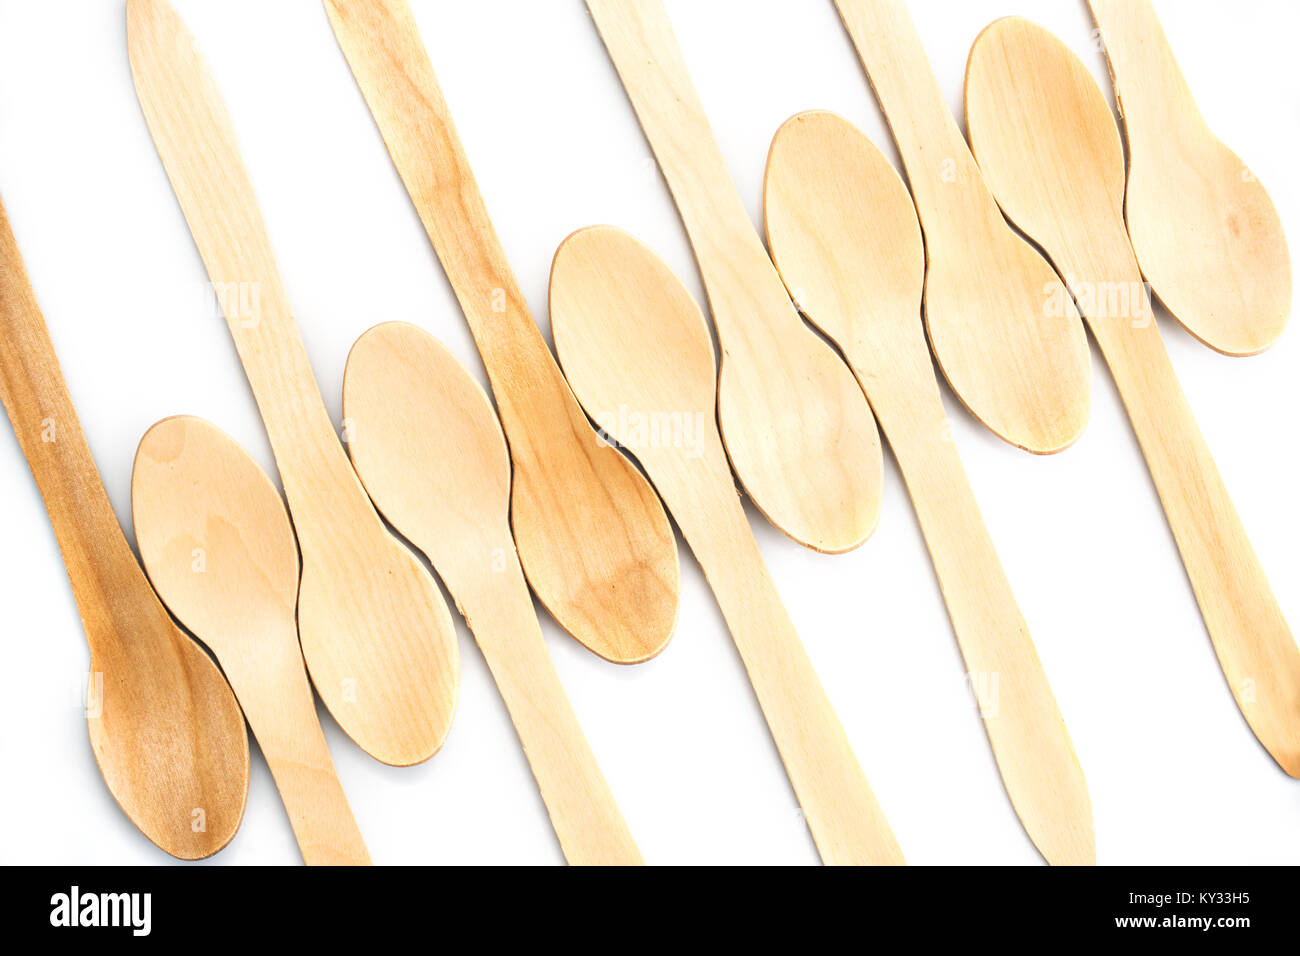 Wooden spoon composition on white background Stock Photo